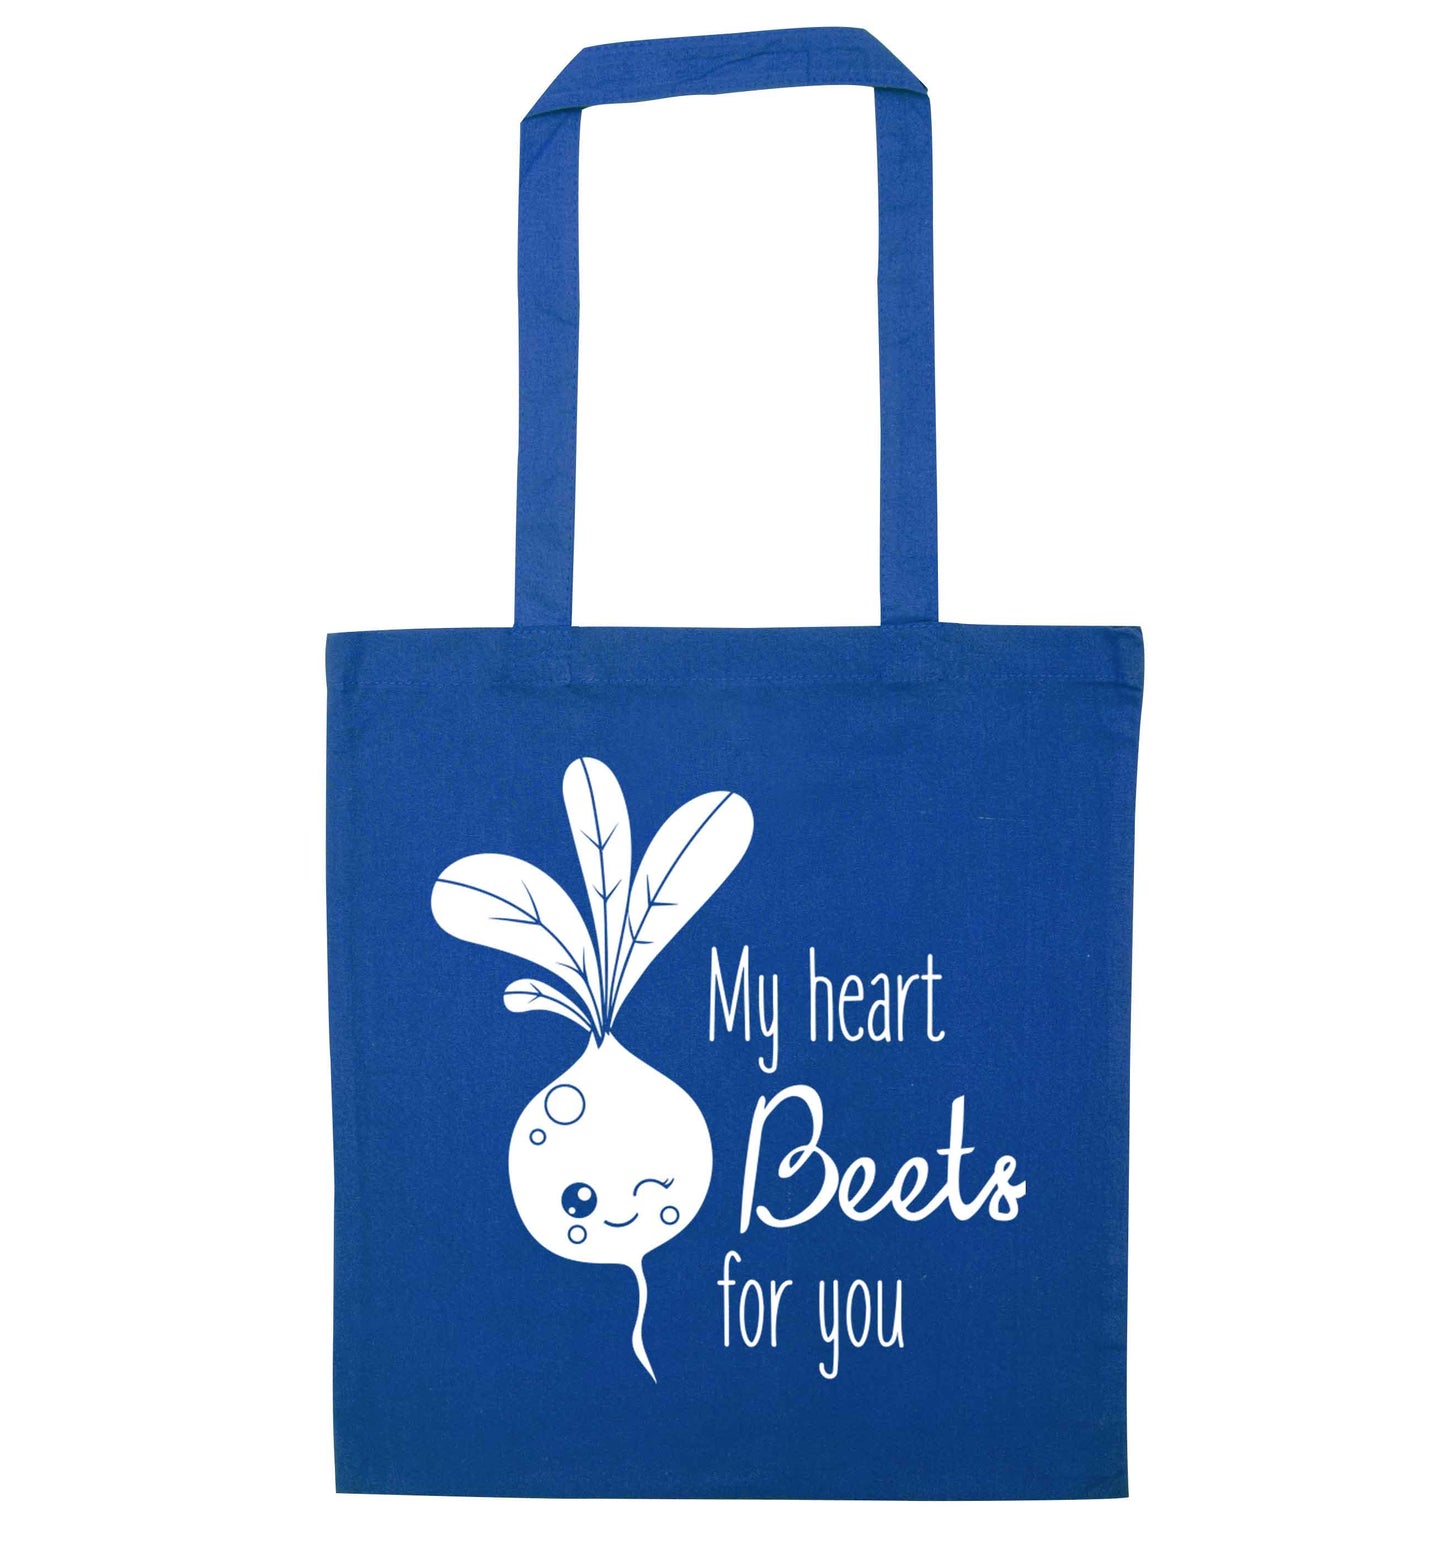 My heart beets for you blue tote bag